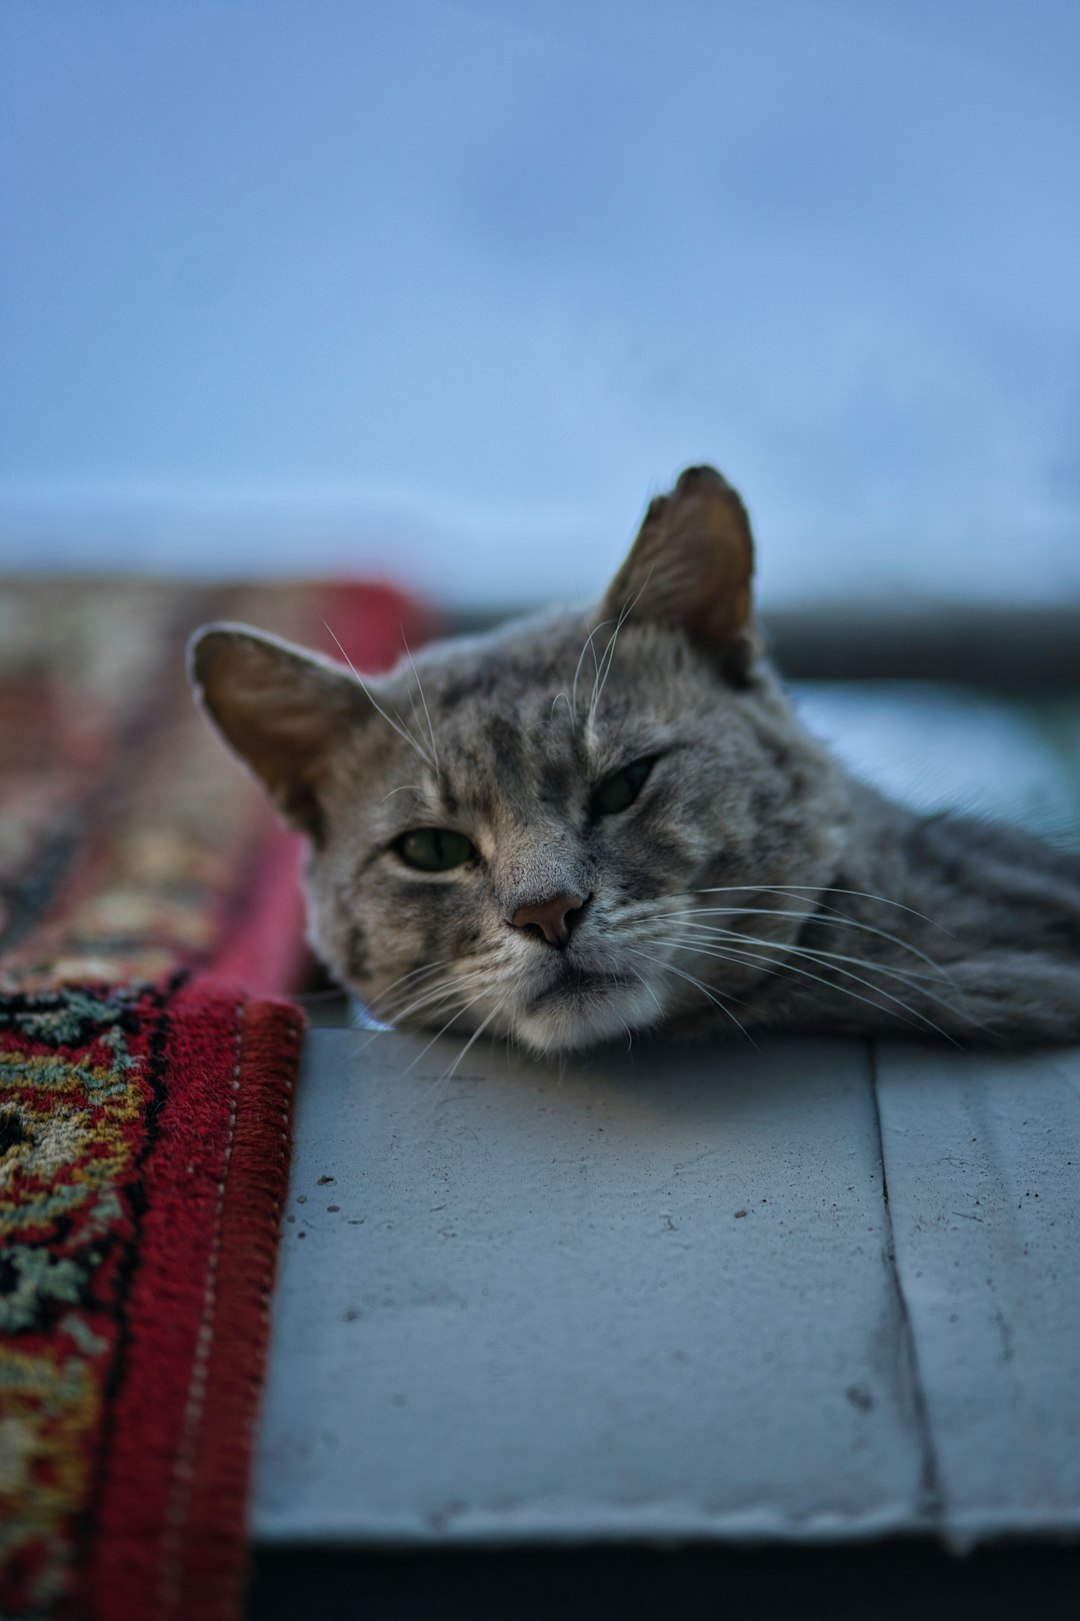 silver tabby cat lying on red and white textile